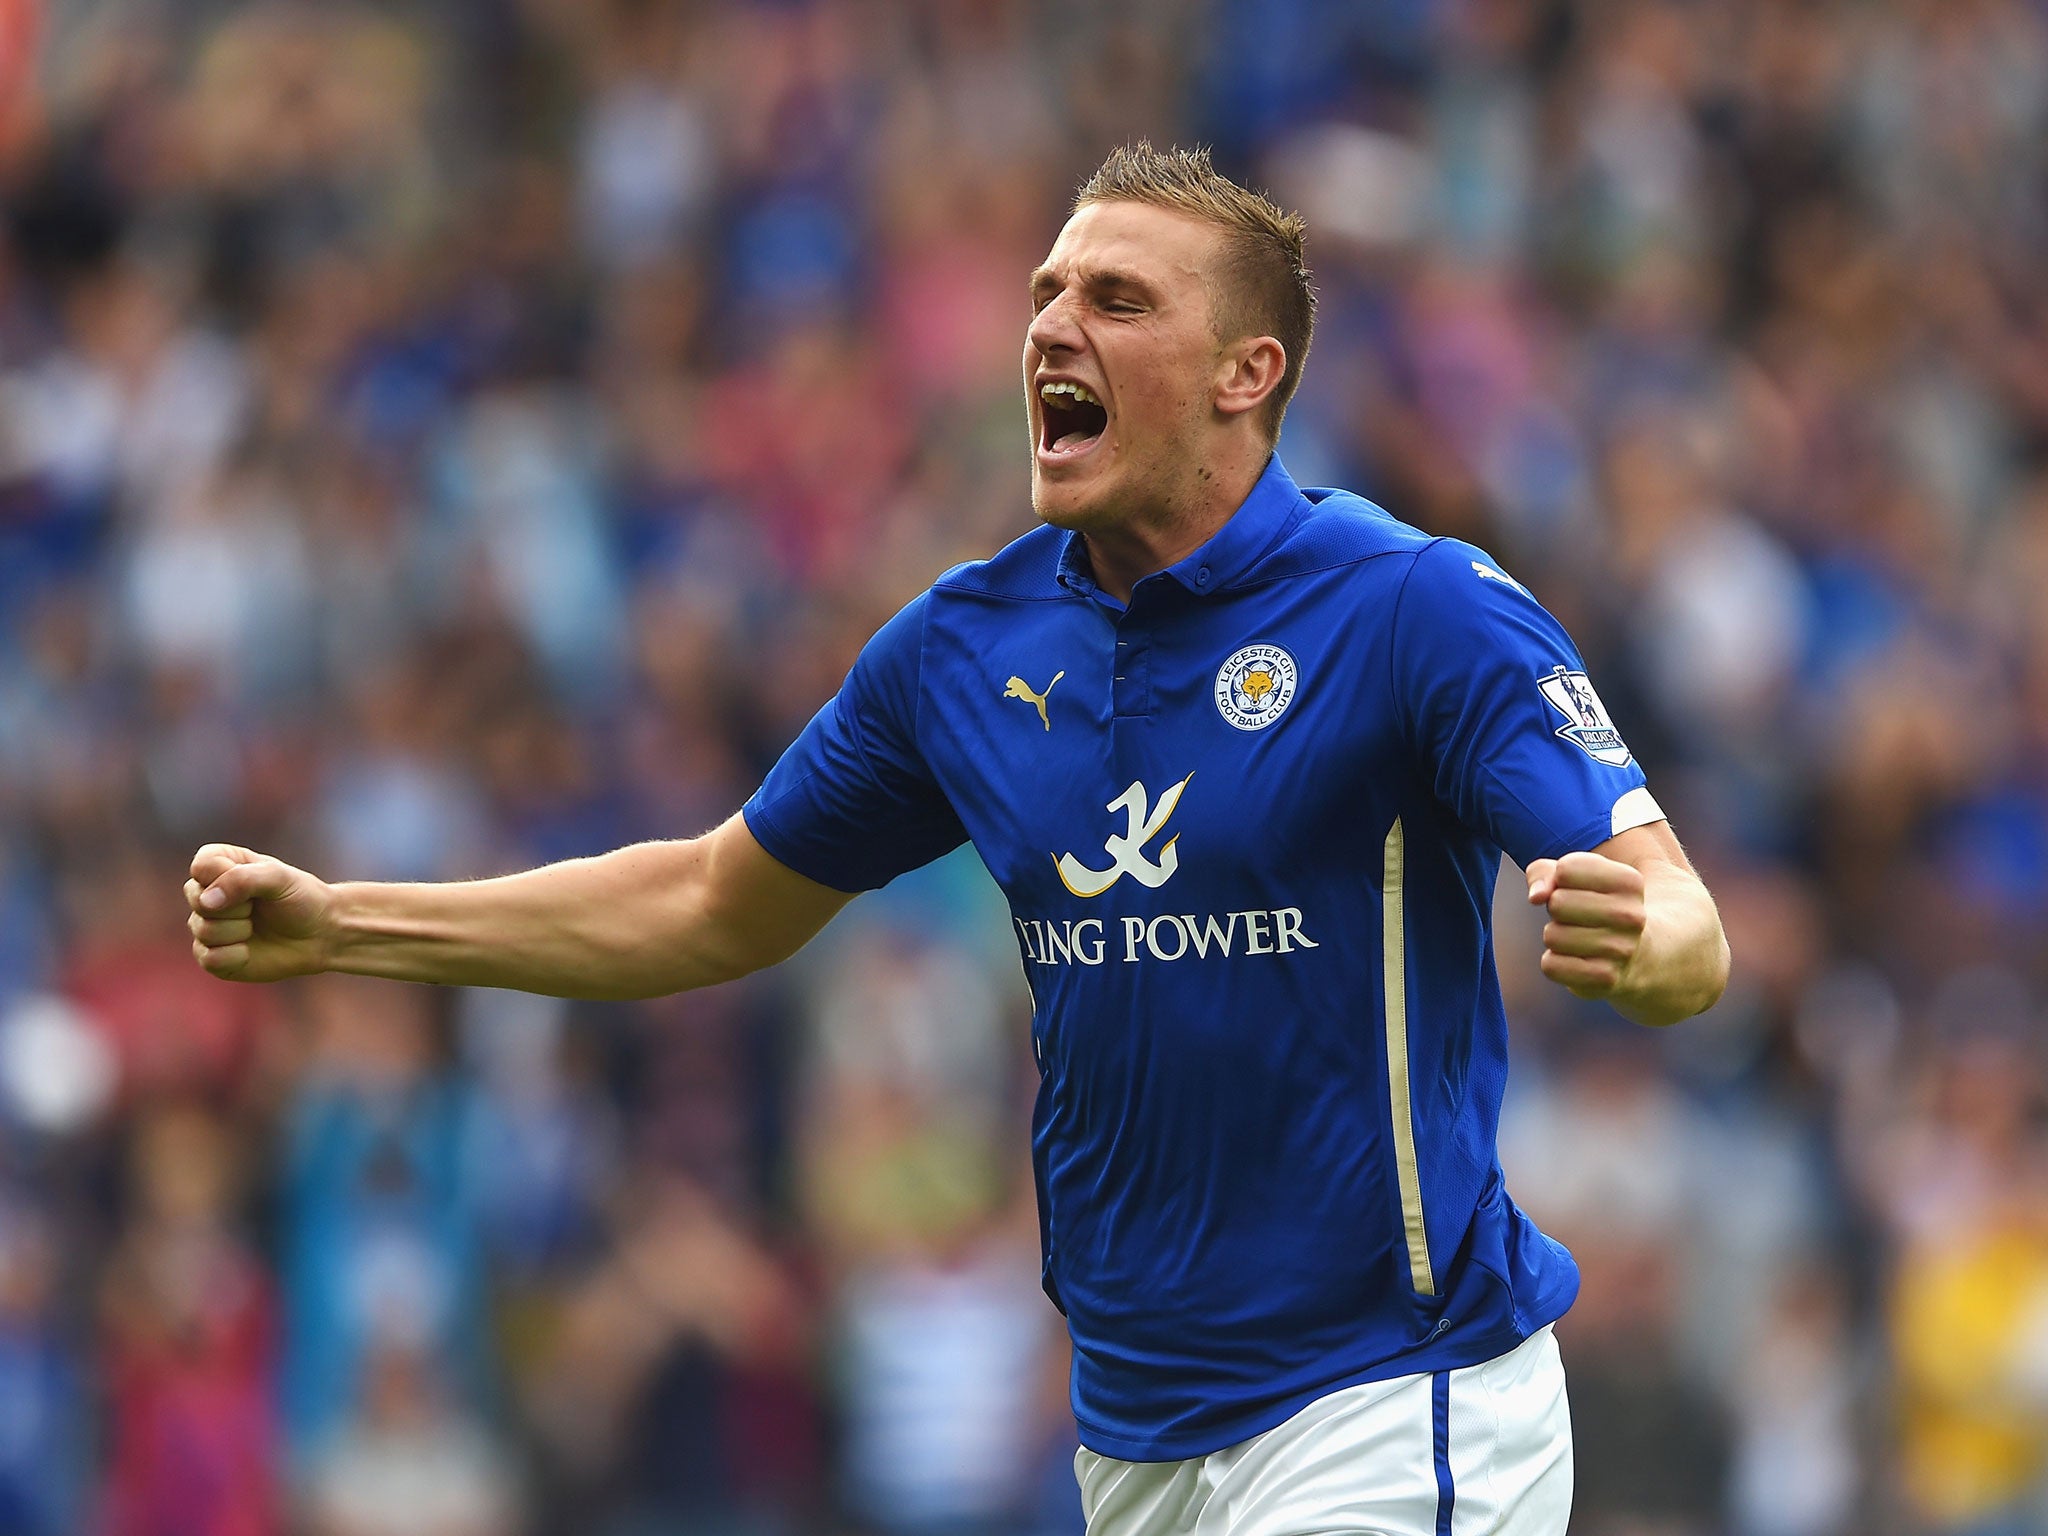 Substitute Chris Wood came off the bench to score a late equaliser for newly promoted Leicester City